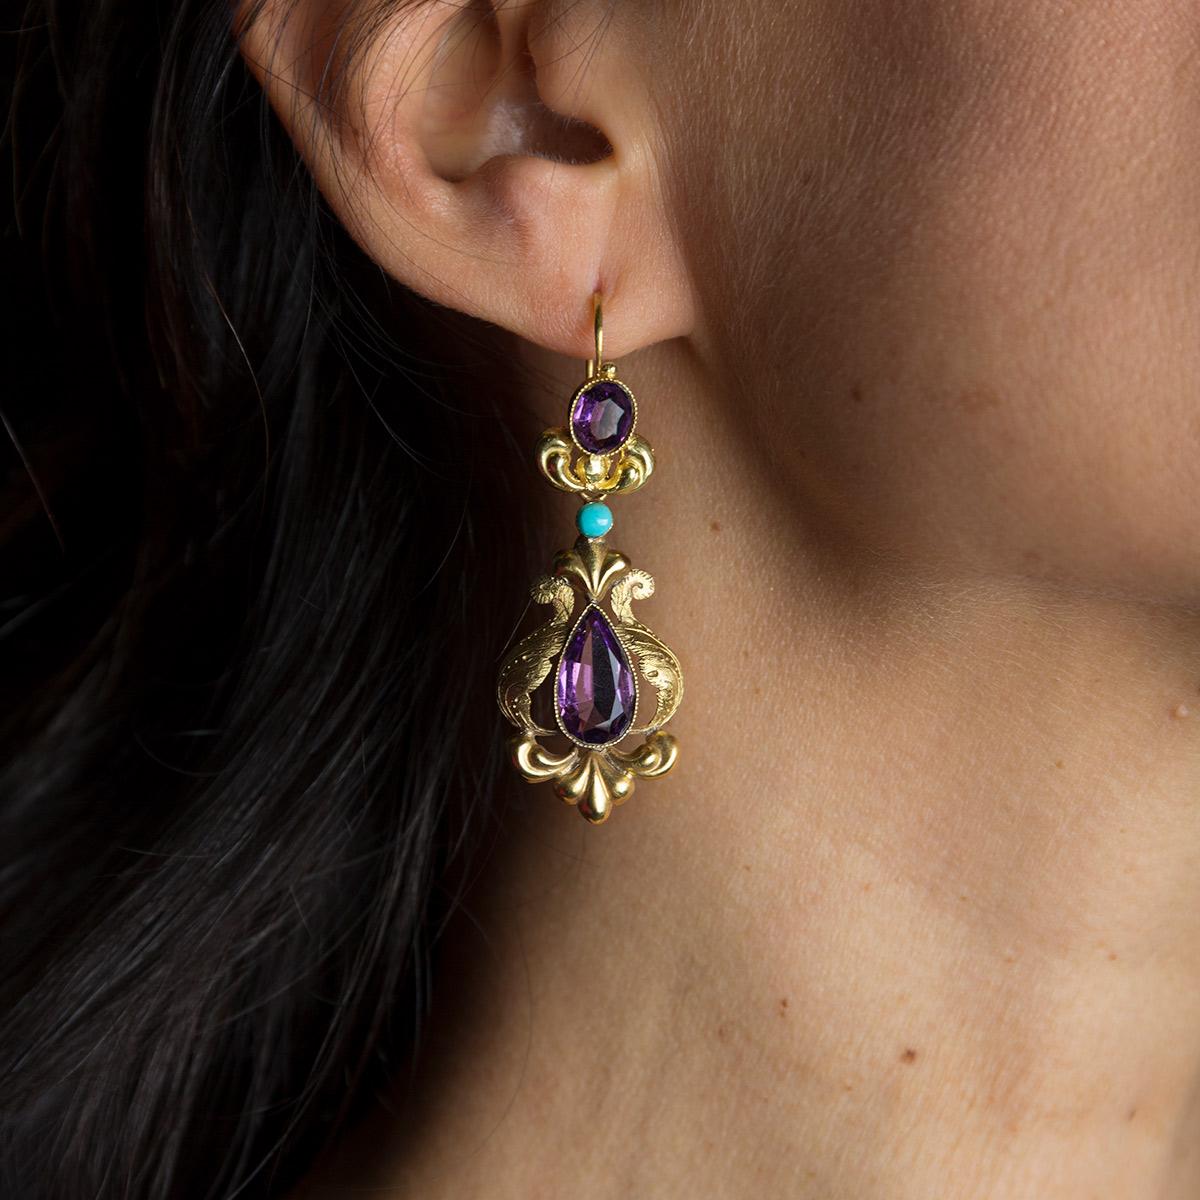 Oval Cut 18 Kt Gold Antique Earrings with Amethysts and Turquoise, Sicily, Early 1900s For Sale